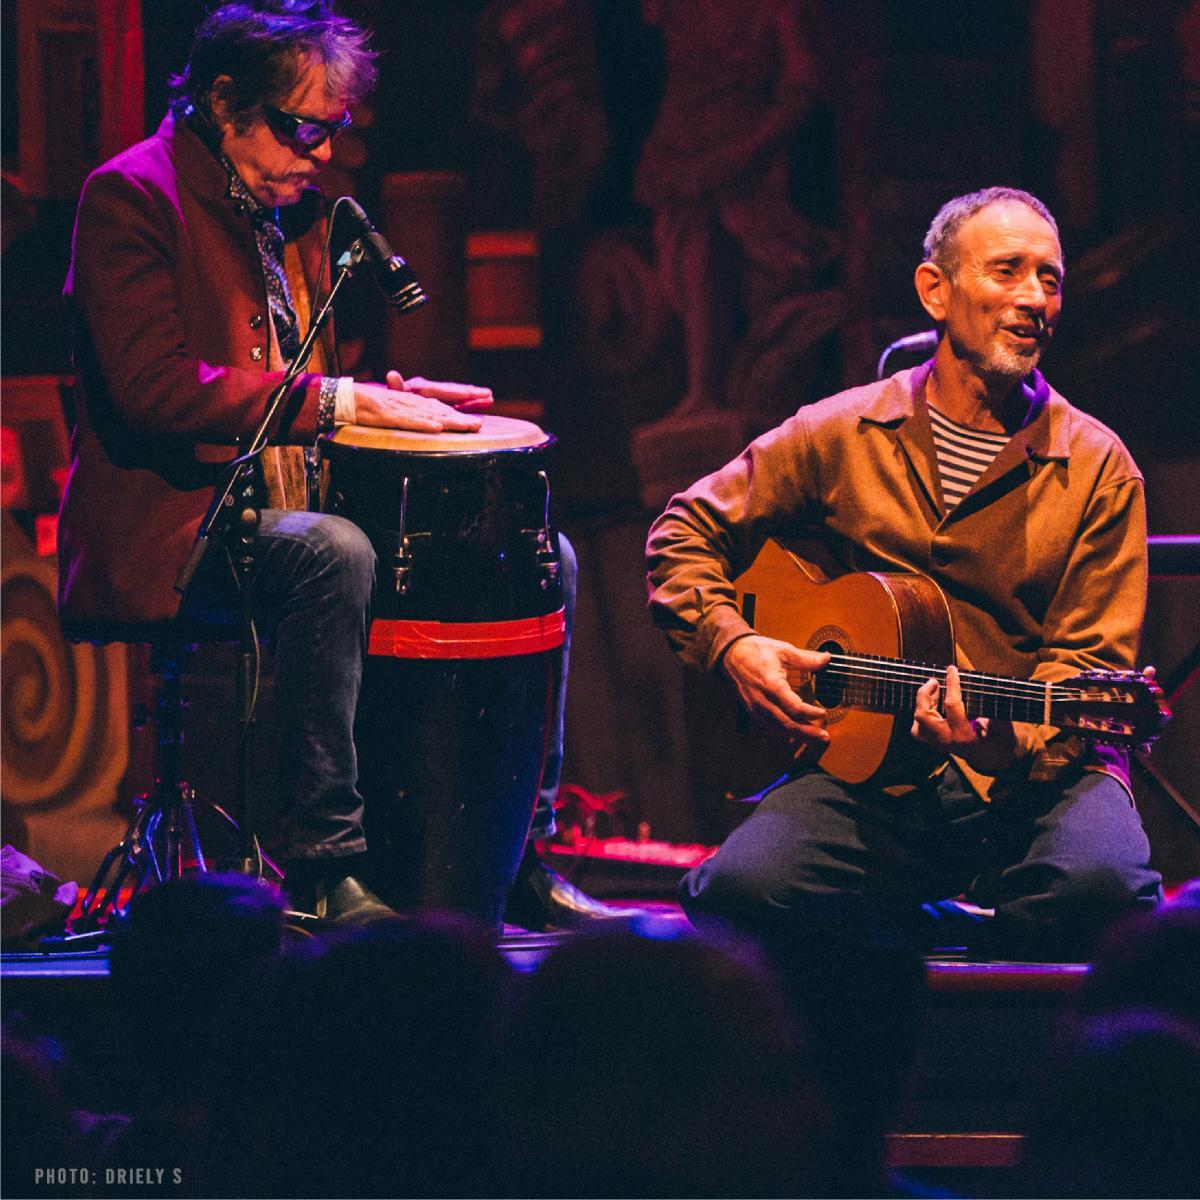 LIVE ON STAGE: JONATHAN RICHMAN featuring TOMMY LARKINS on the drums!